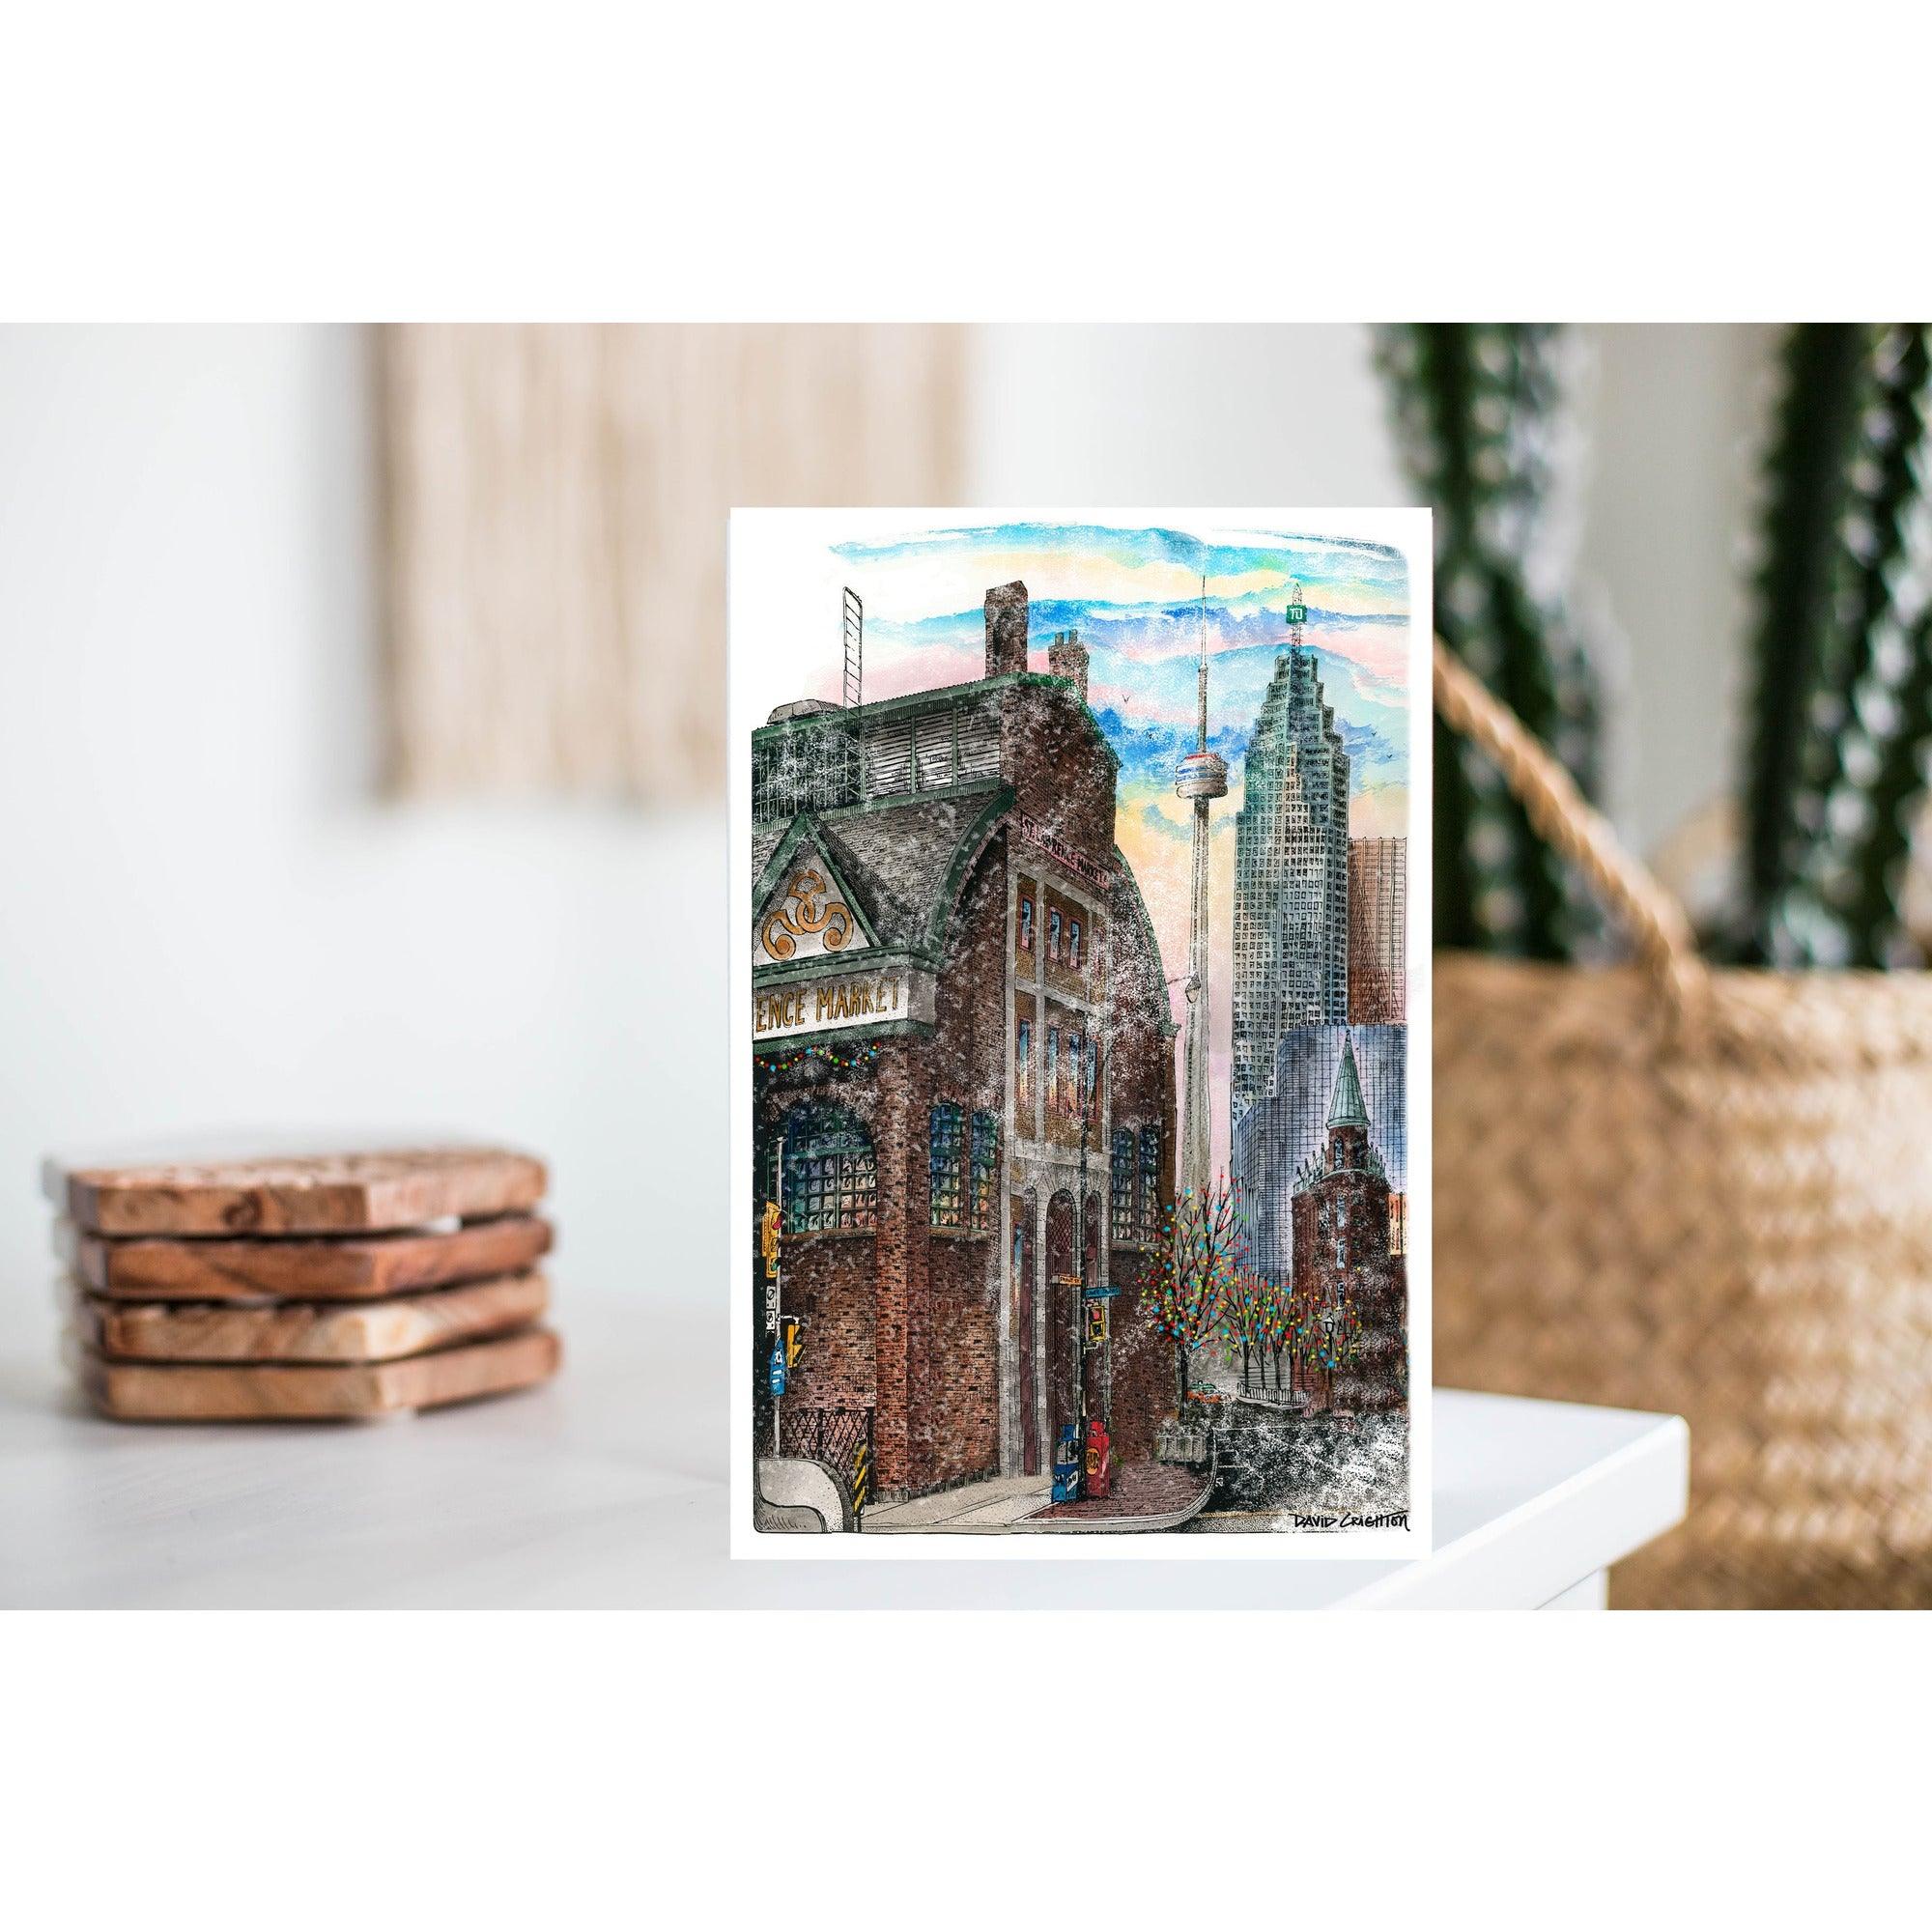 Winter At The St.  Lawrence Market Christmas Card | Totally Toronto Art Inc. 